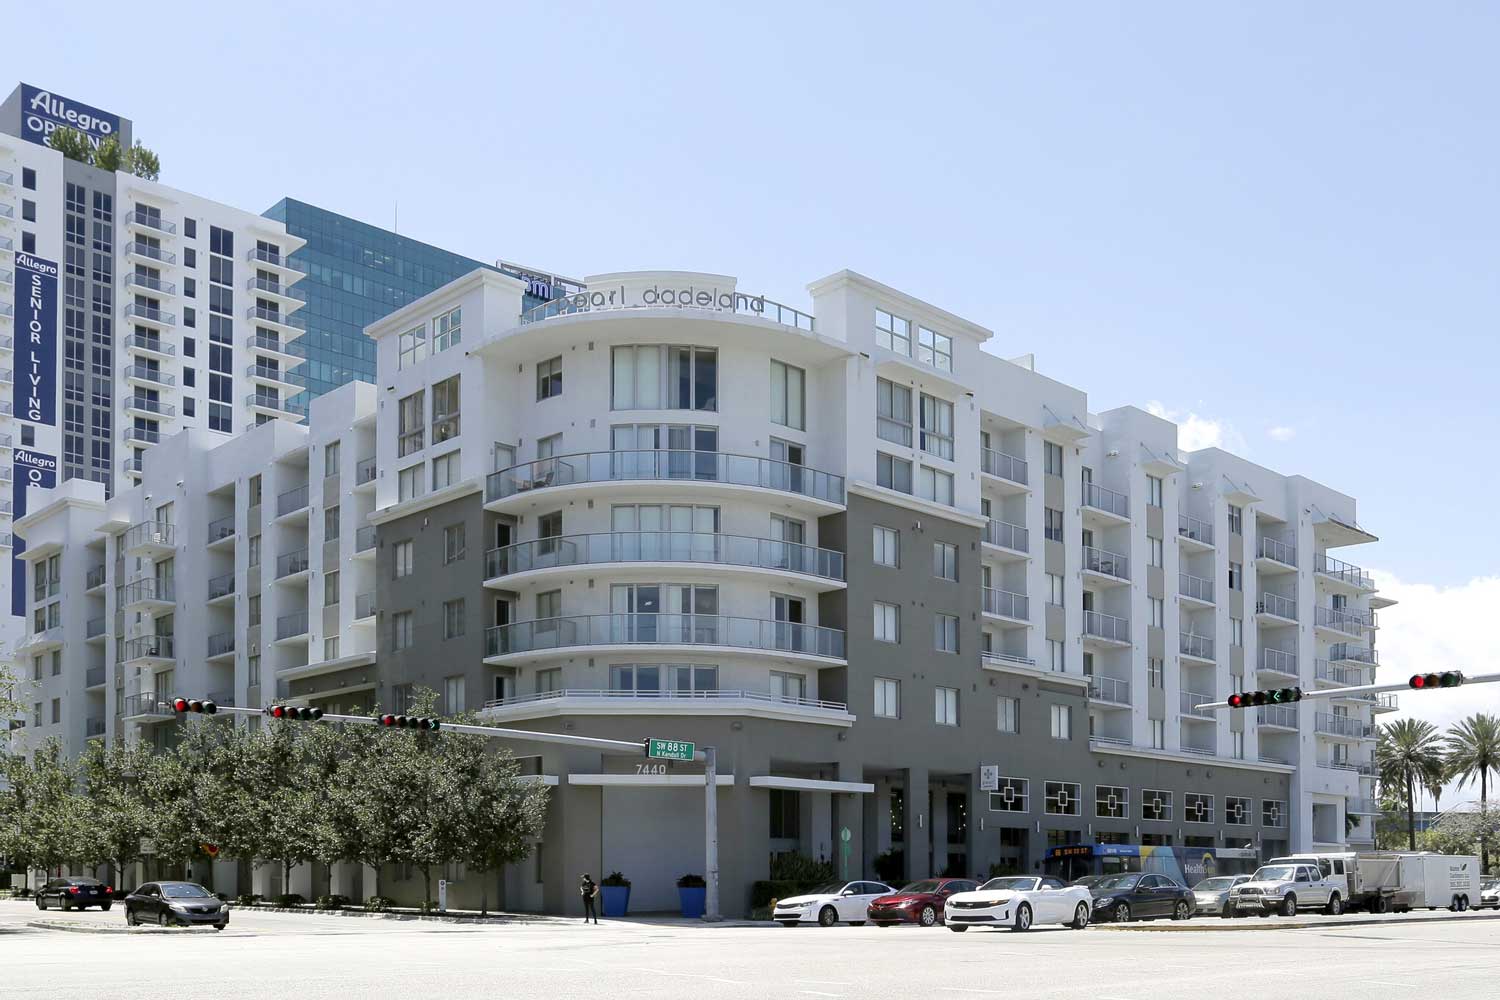 Luxury apartment homes in south miami downtown dadeland; one, two, three bedroom apartments